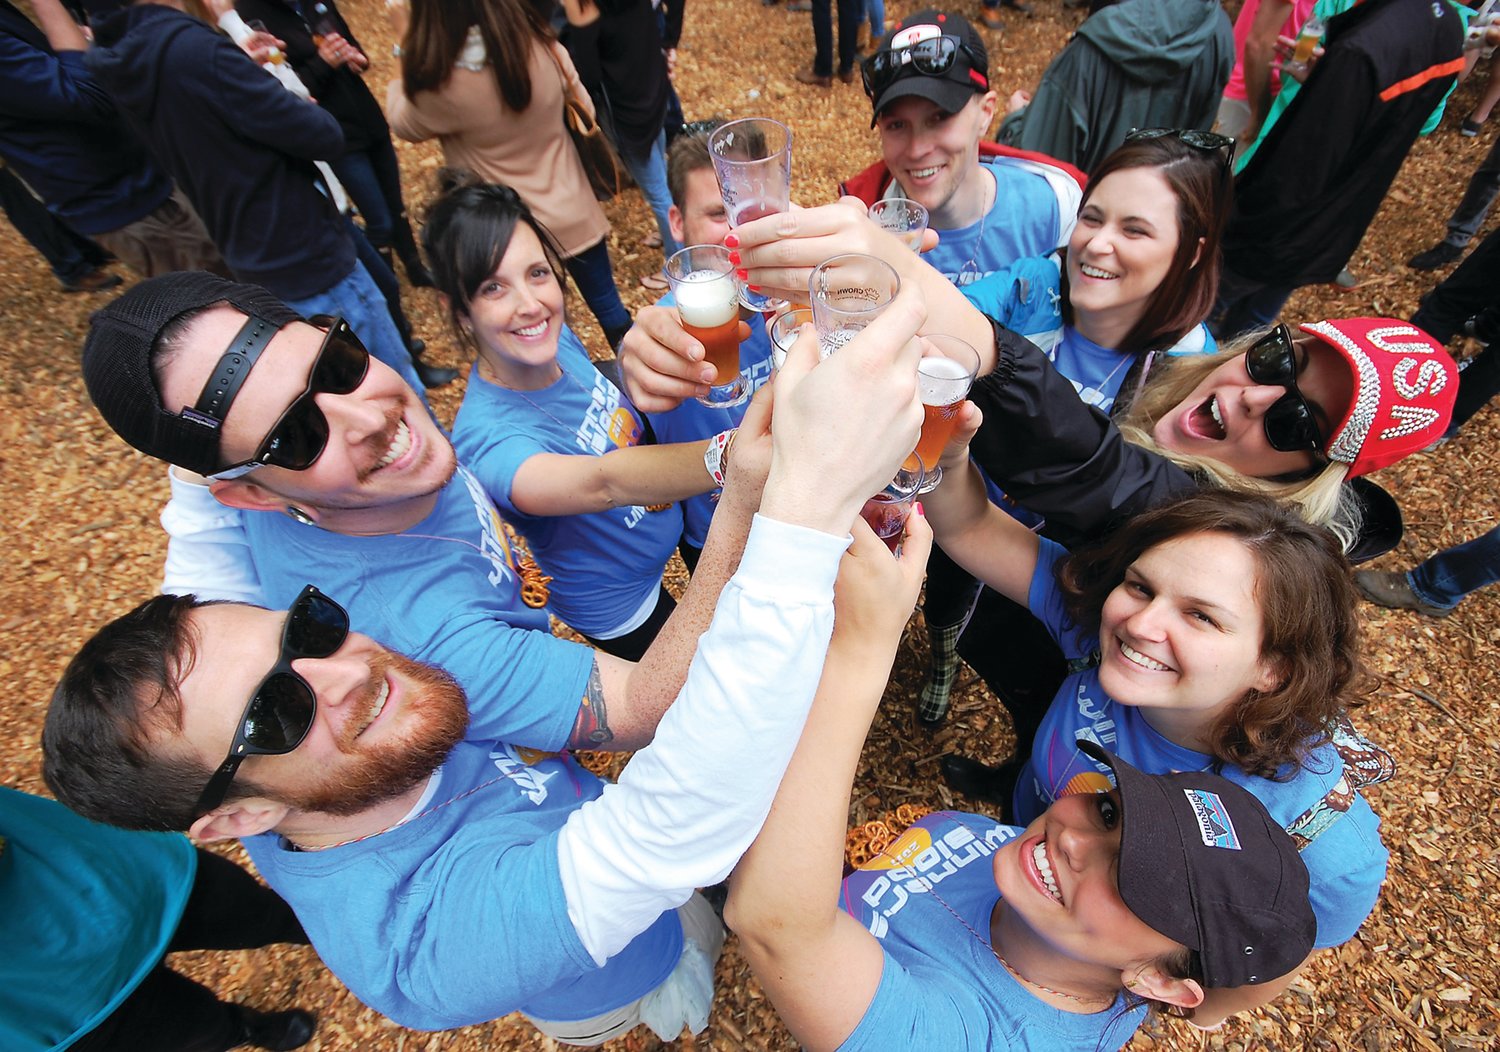 Beer lovers make a toast at a Washington Crossing Brewfest.